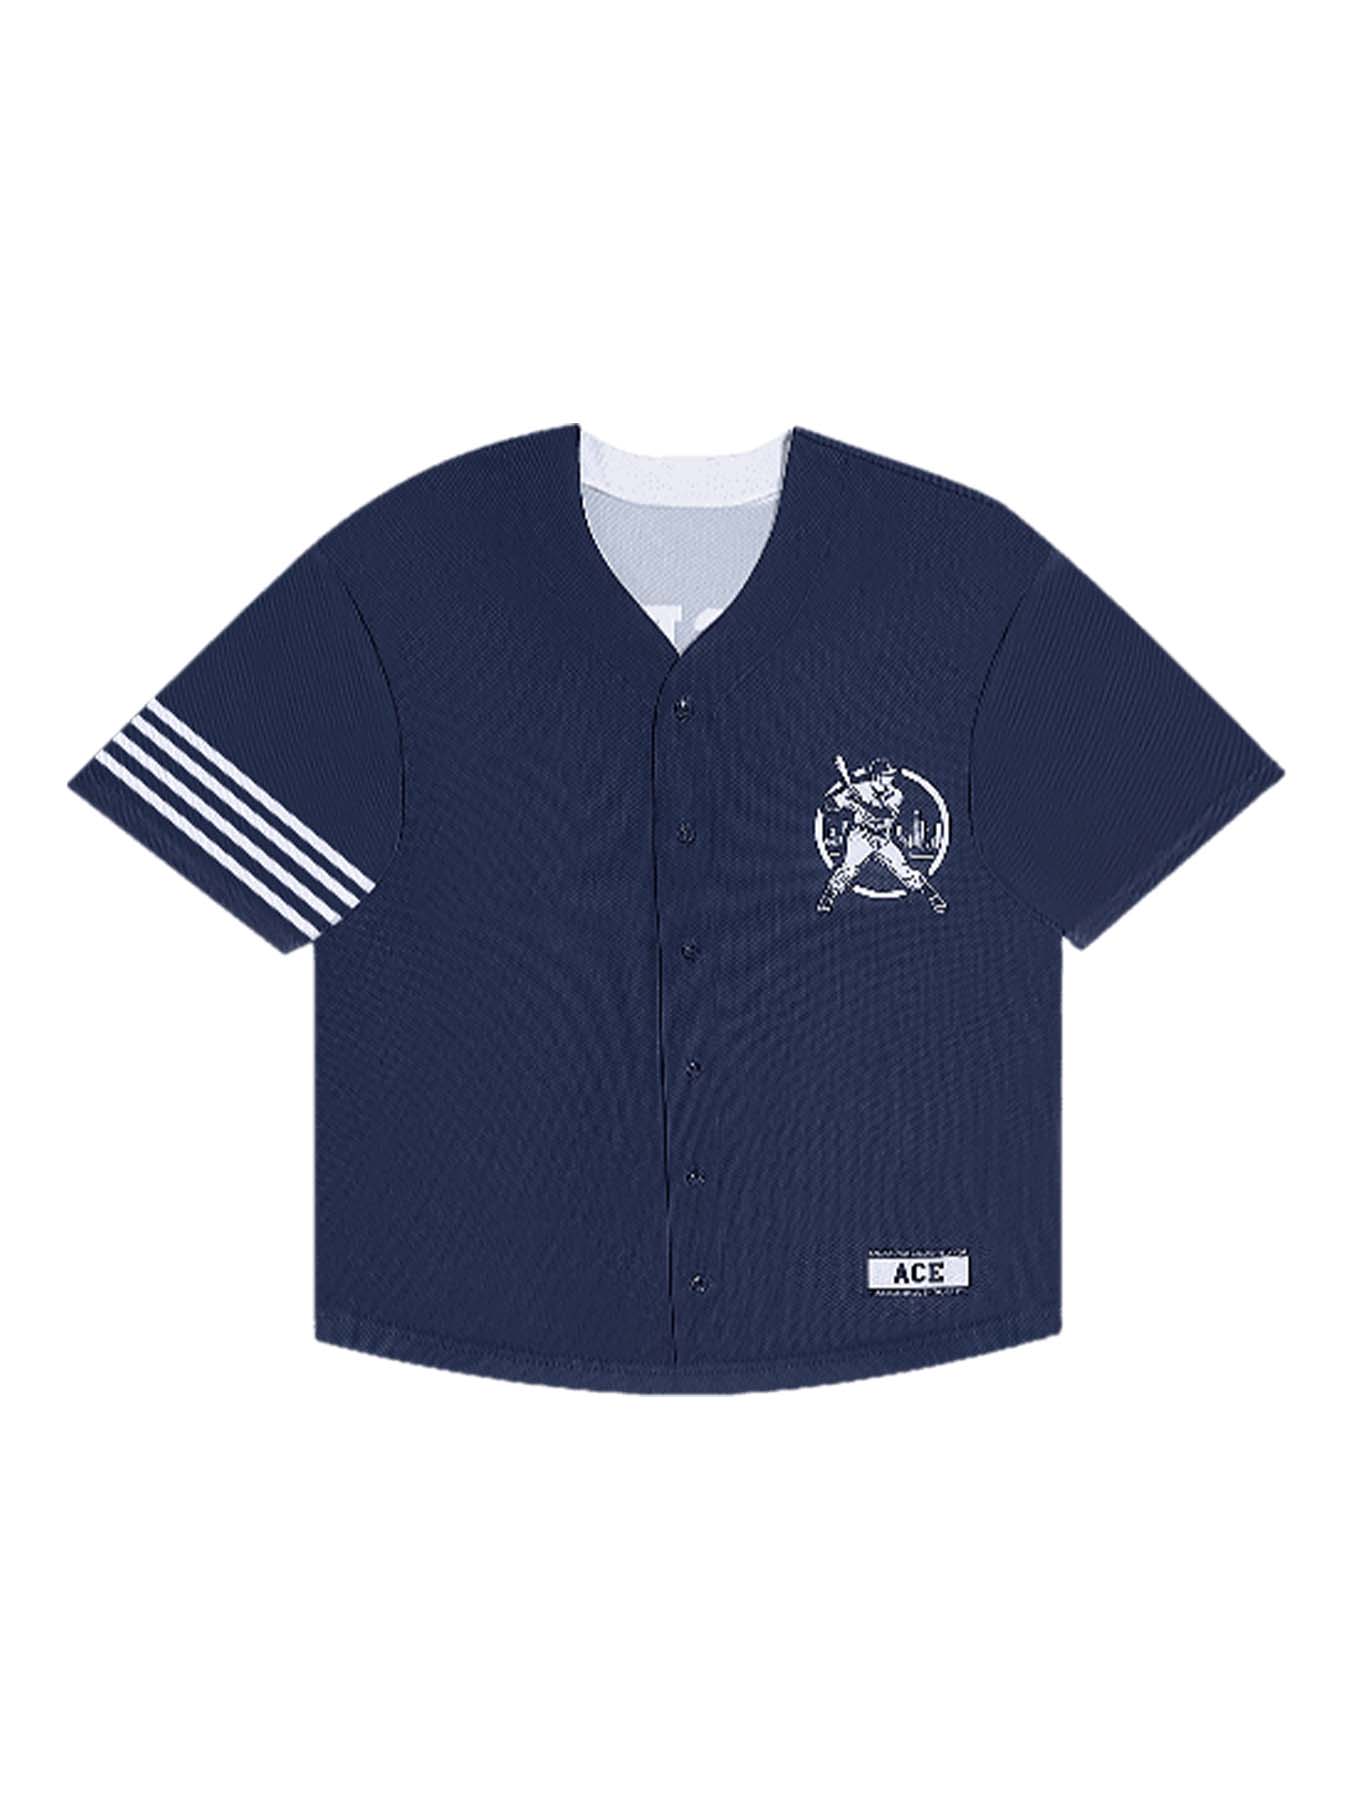 Men's Hip Hop Style Color Block #23 Baseball Jersey, Retro Baseball Shirt, Slightly Stretch Breathable Embroidery Button Up Sports Uniform for